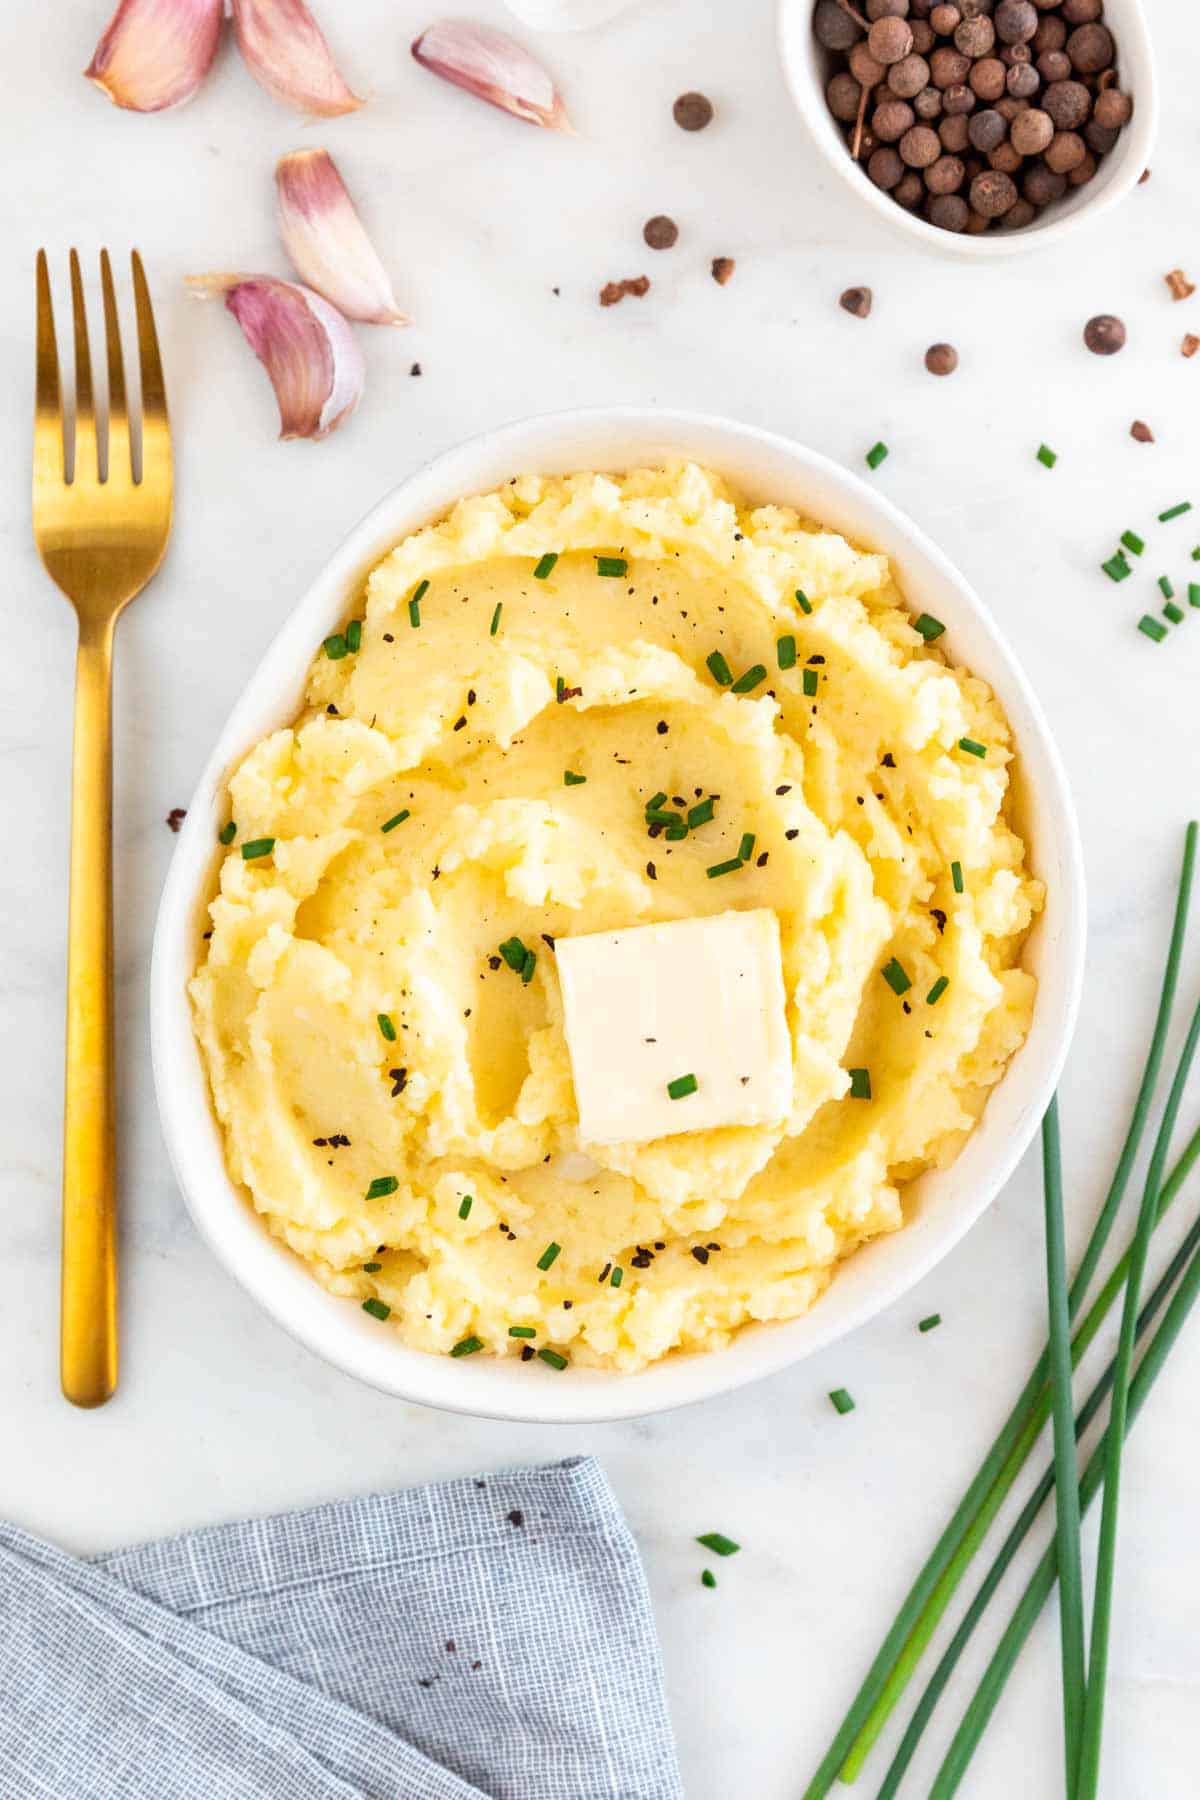 Bowl of vegan mashed potatoes garnished with vegan butter, chives, and black pepper.